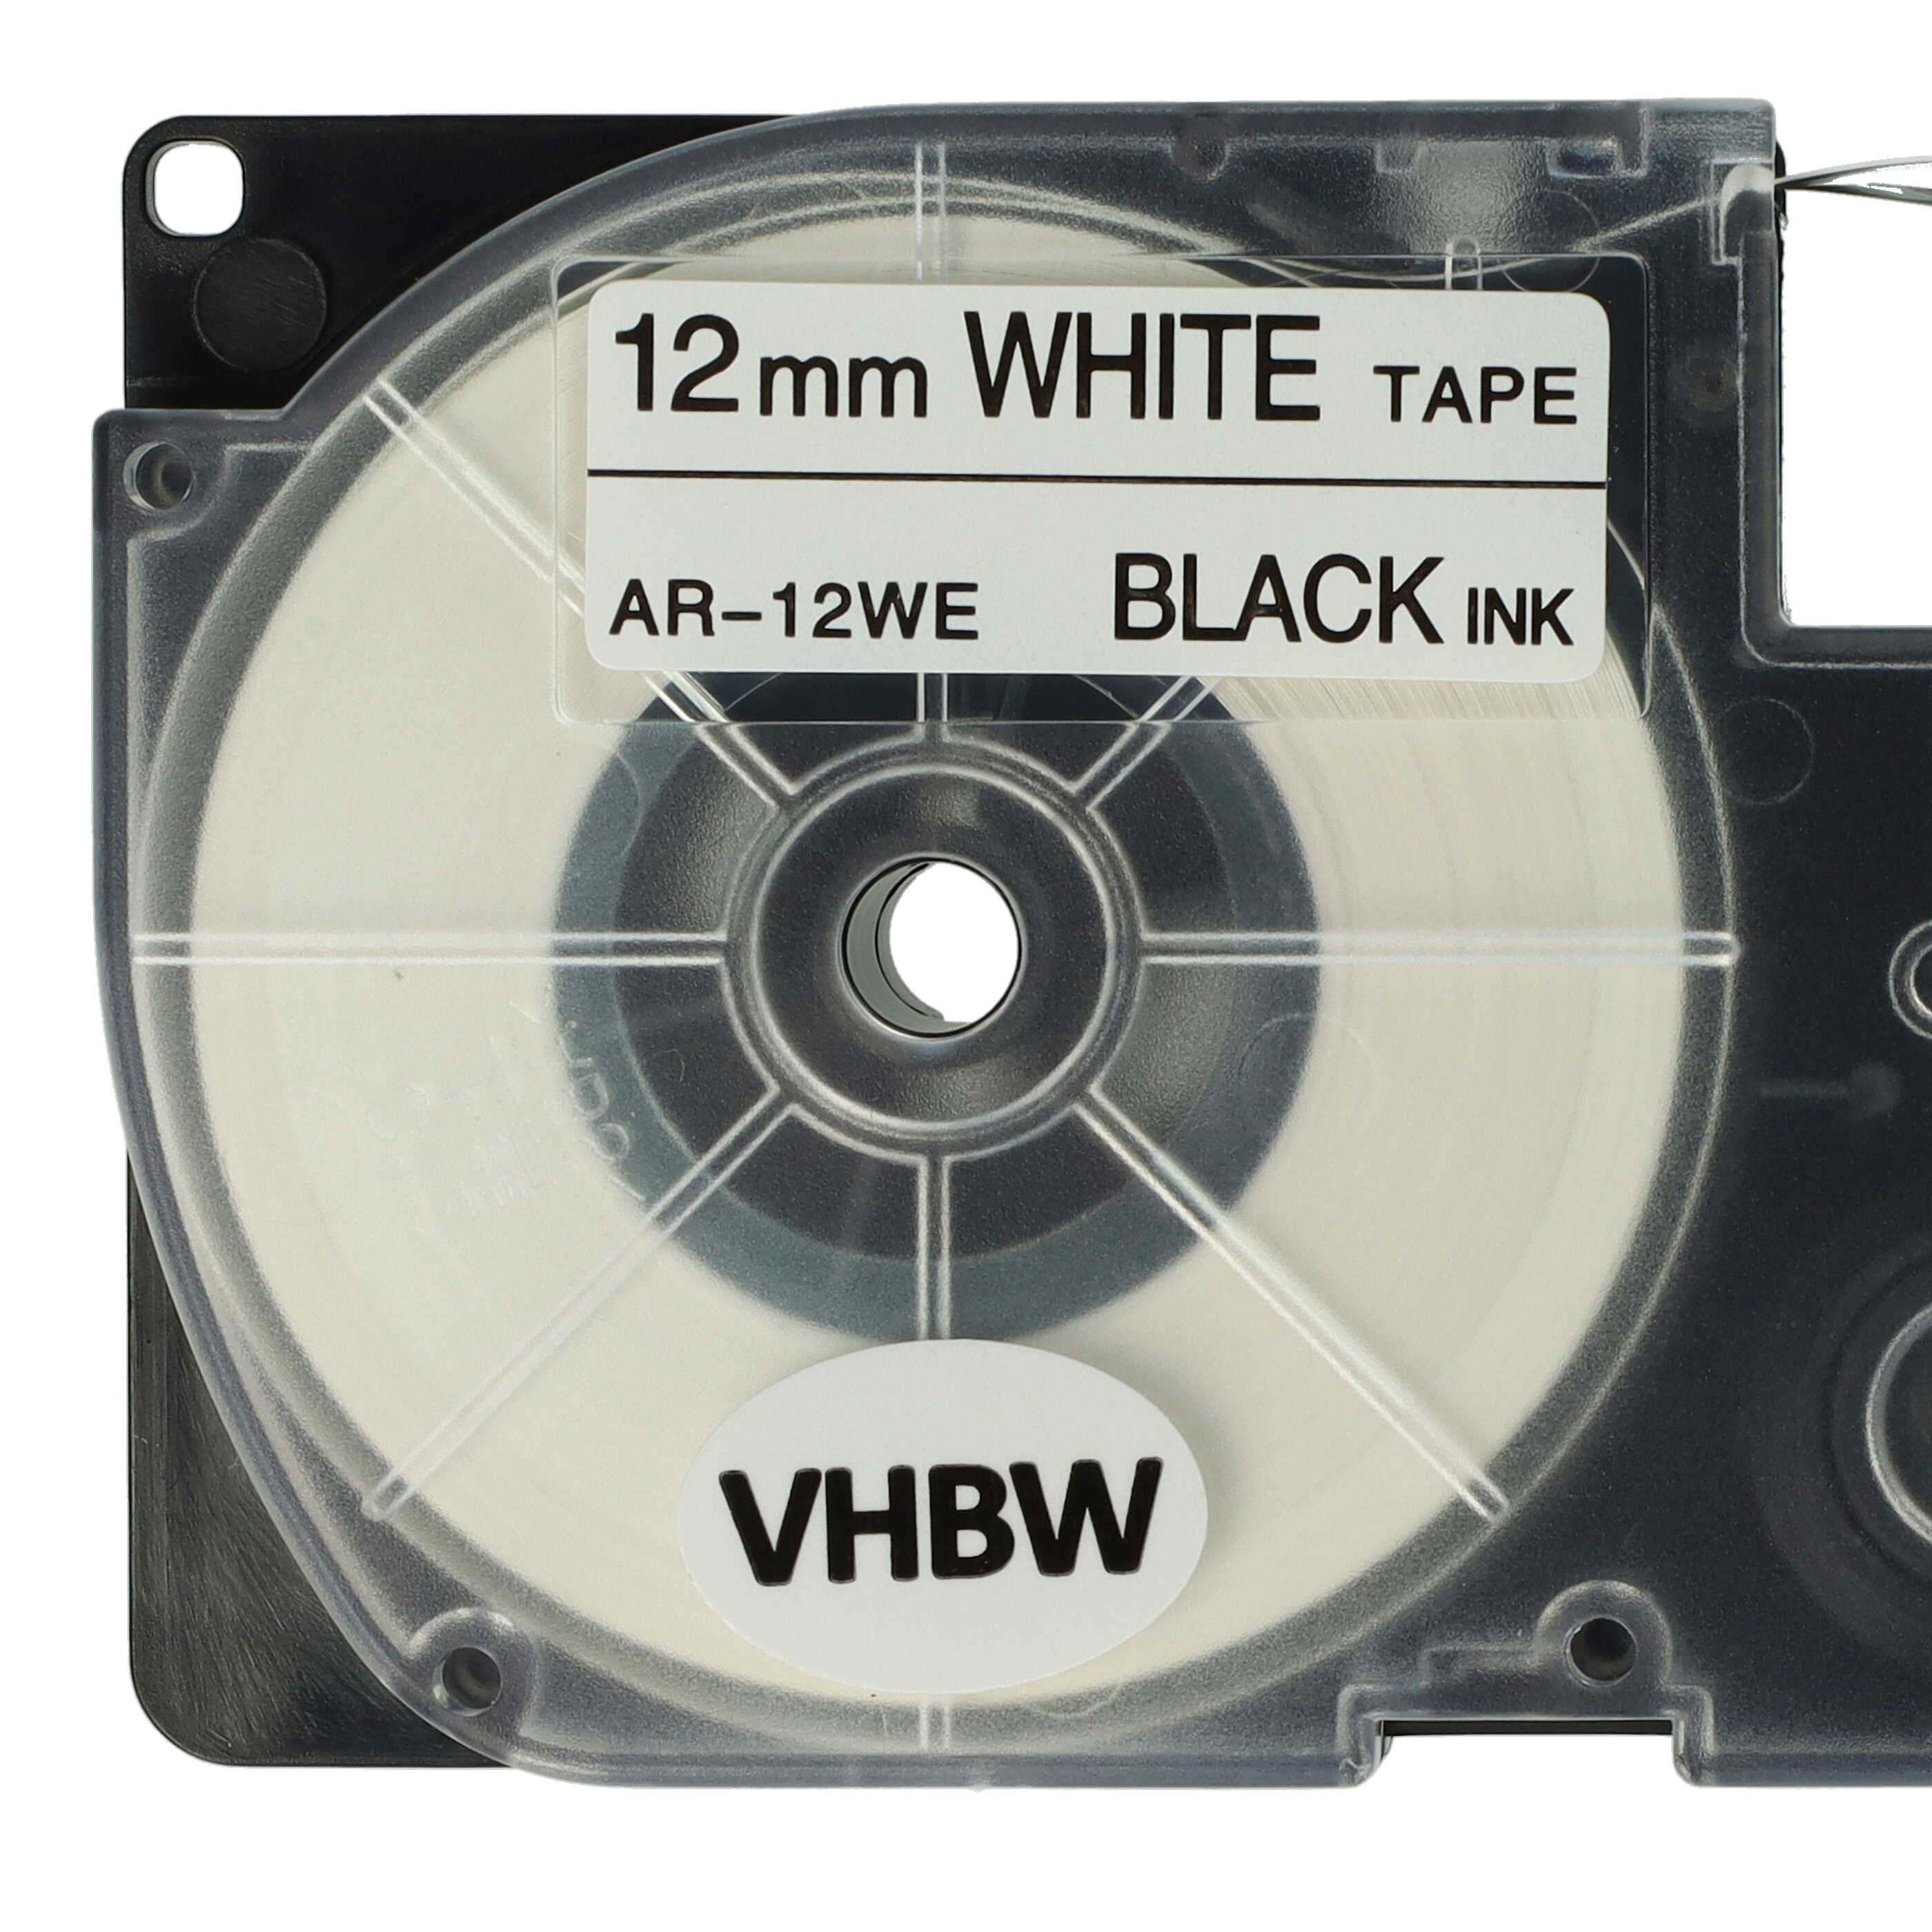 3x Label Tape as Replacement for Casio XR-12WE, XR-12WE1 - 12 mm Black to White